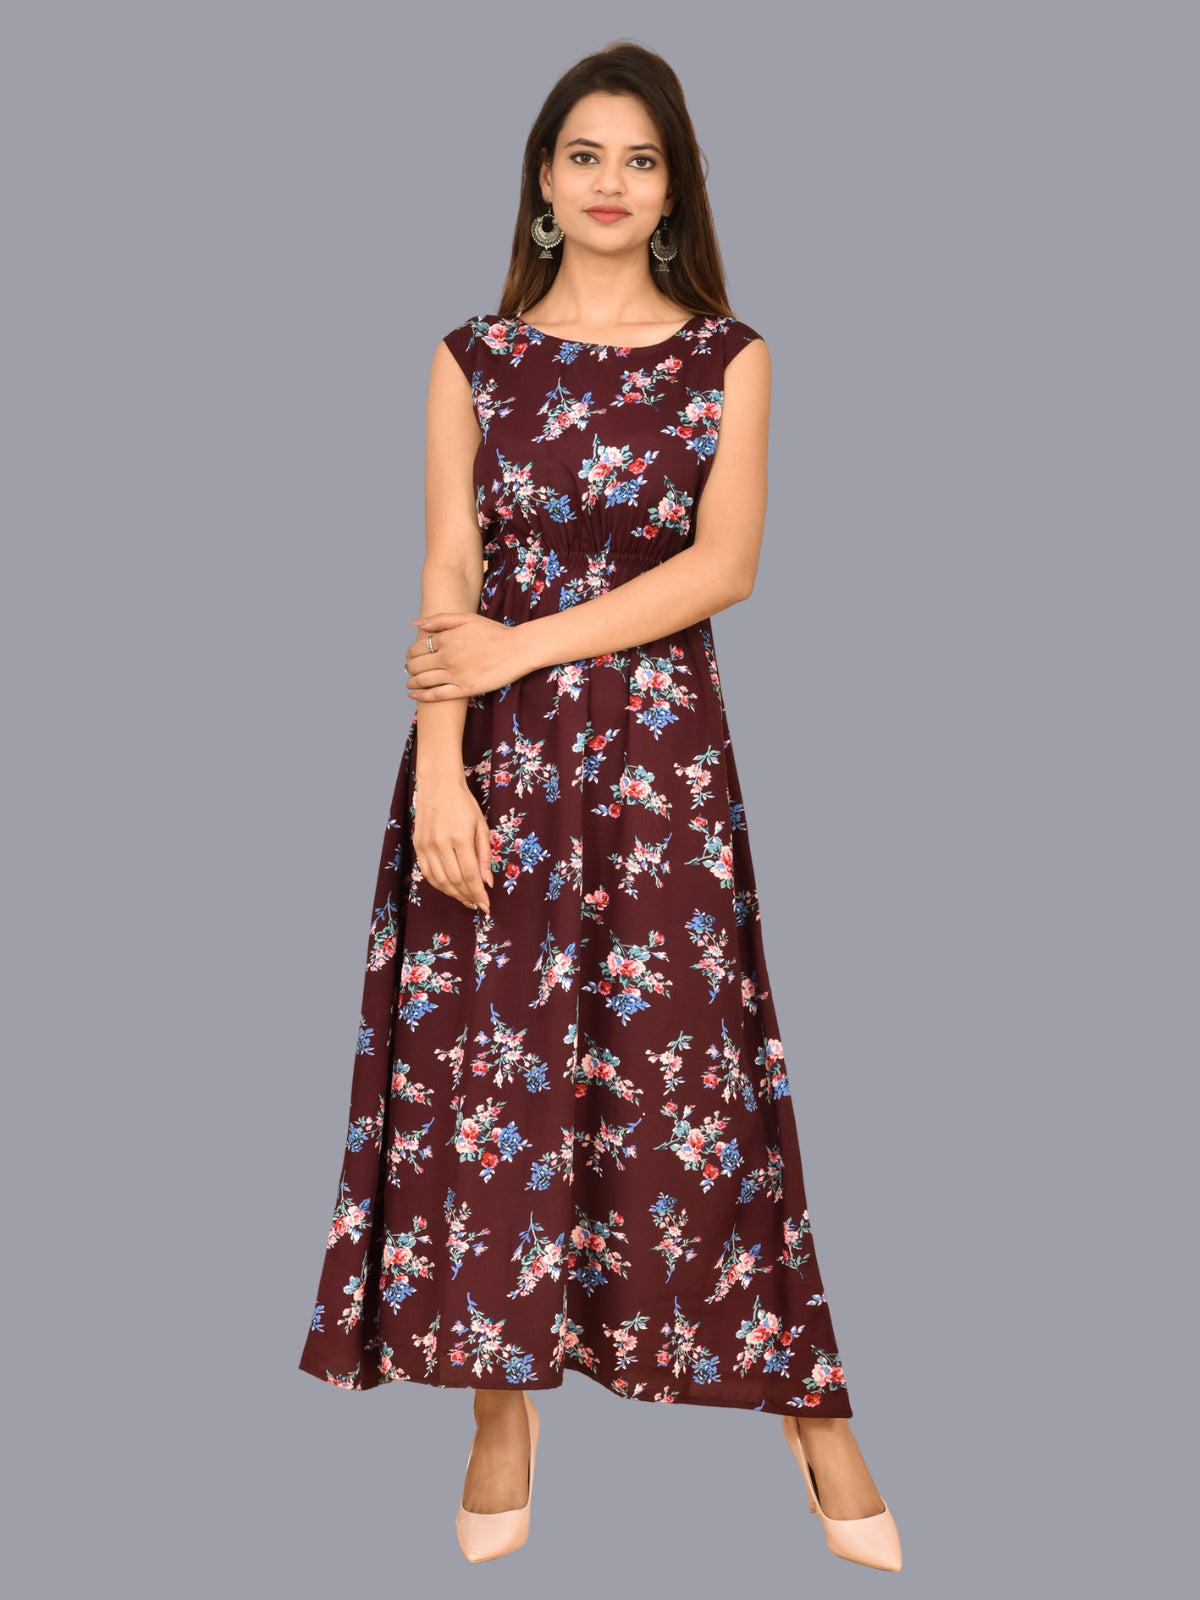 Womens Wine Floral Printed Crepe Fabric Maxi Dress